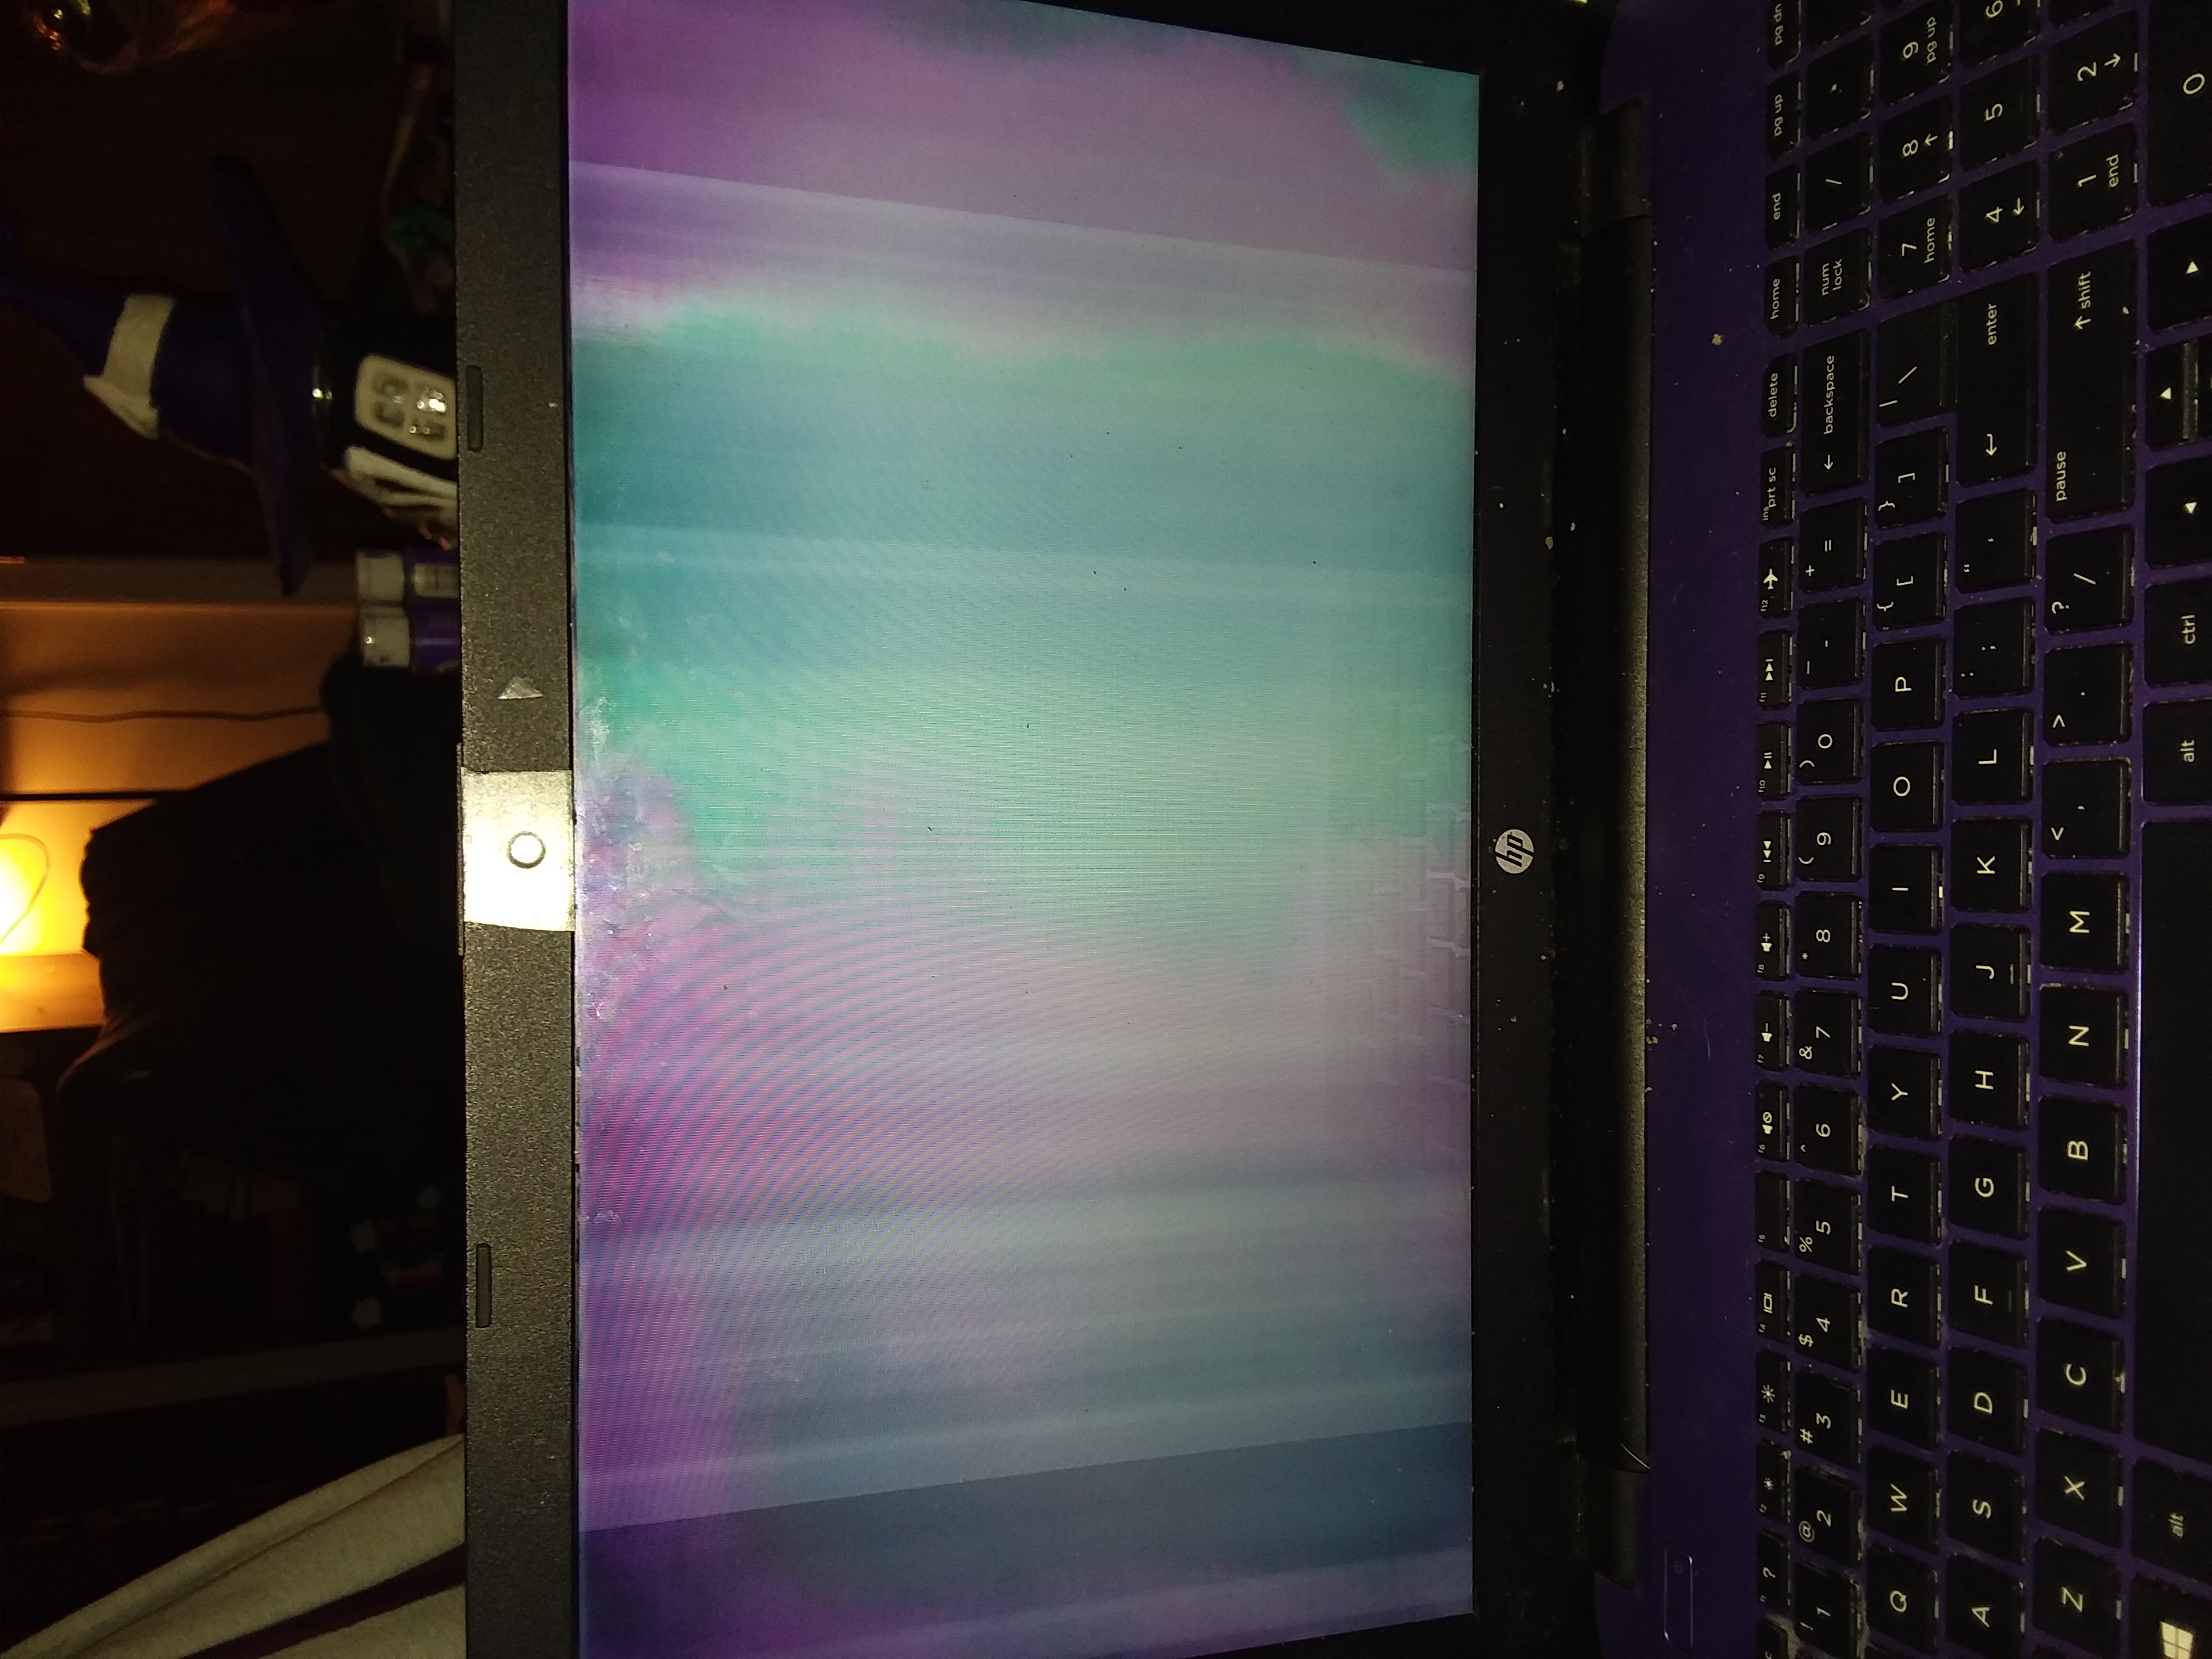 My laptop freezes with purple and green - HP Support Community - 7013980